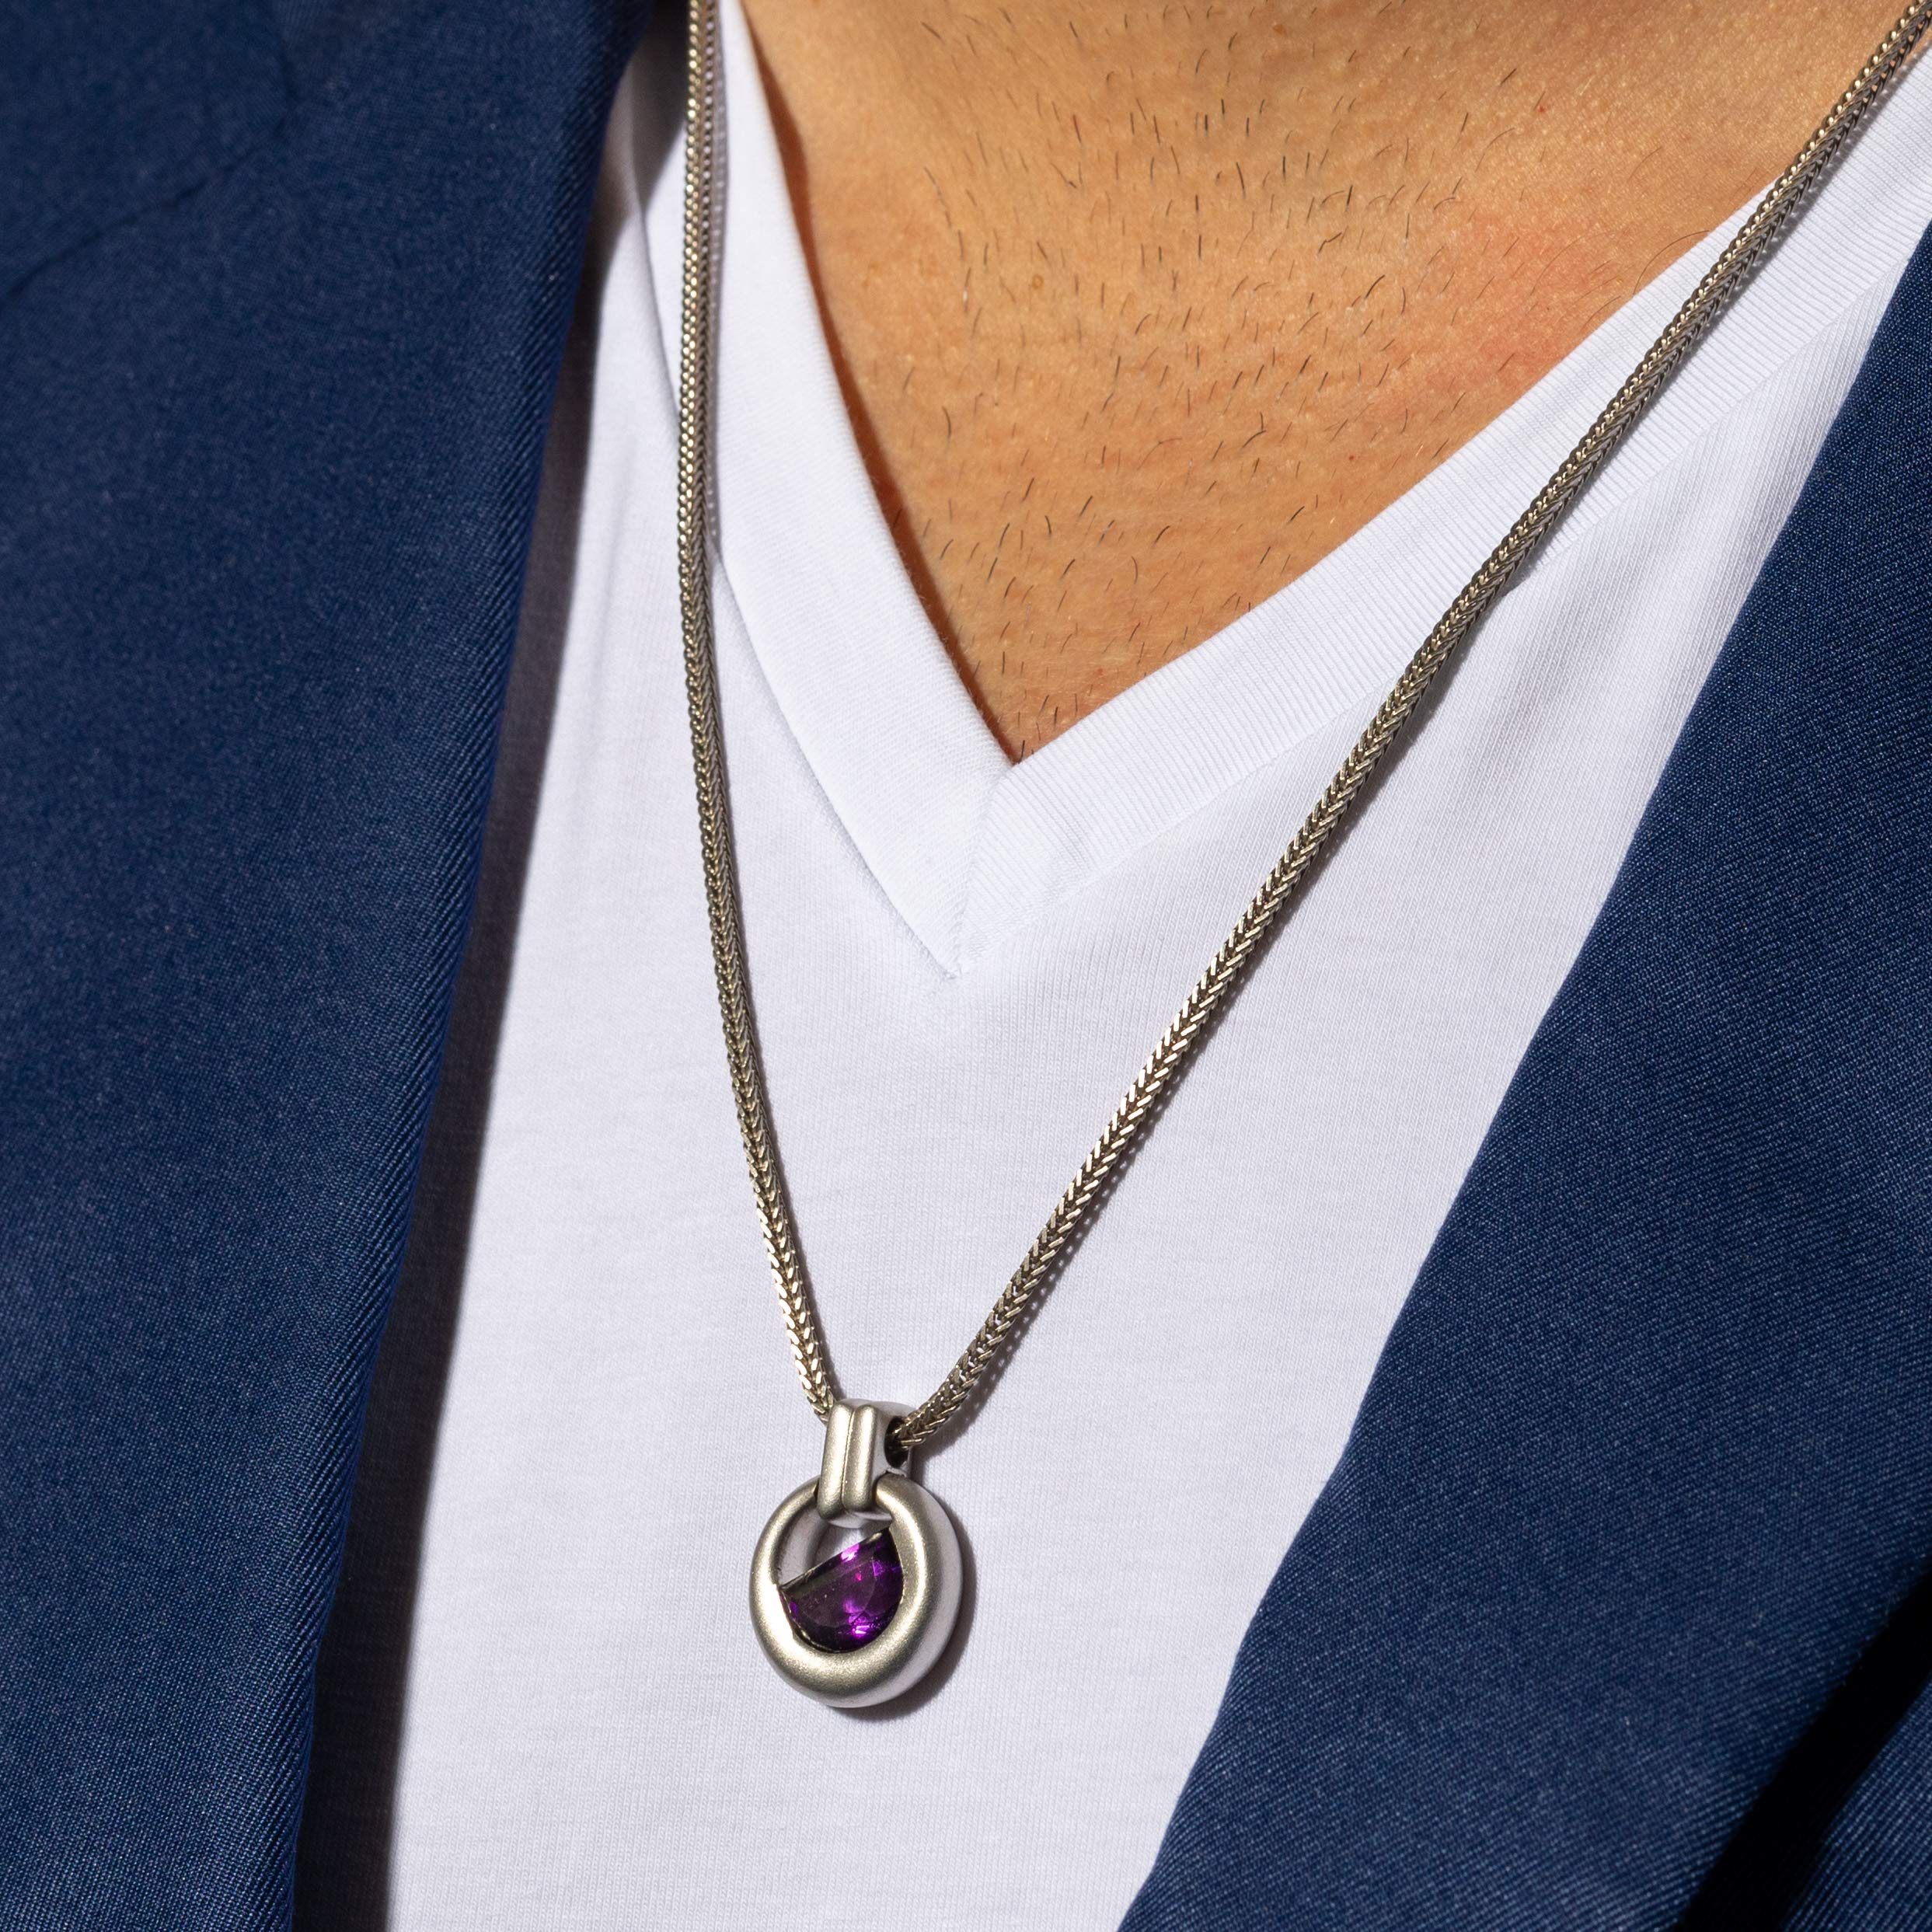 Peora Amethyst Amulet Pendant Necklace for Men in Sterling Silver, 3 Carats Half Moon Shape, Brushed Finished, with 22-Inch Italian Chain